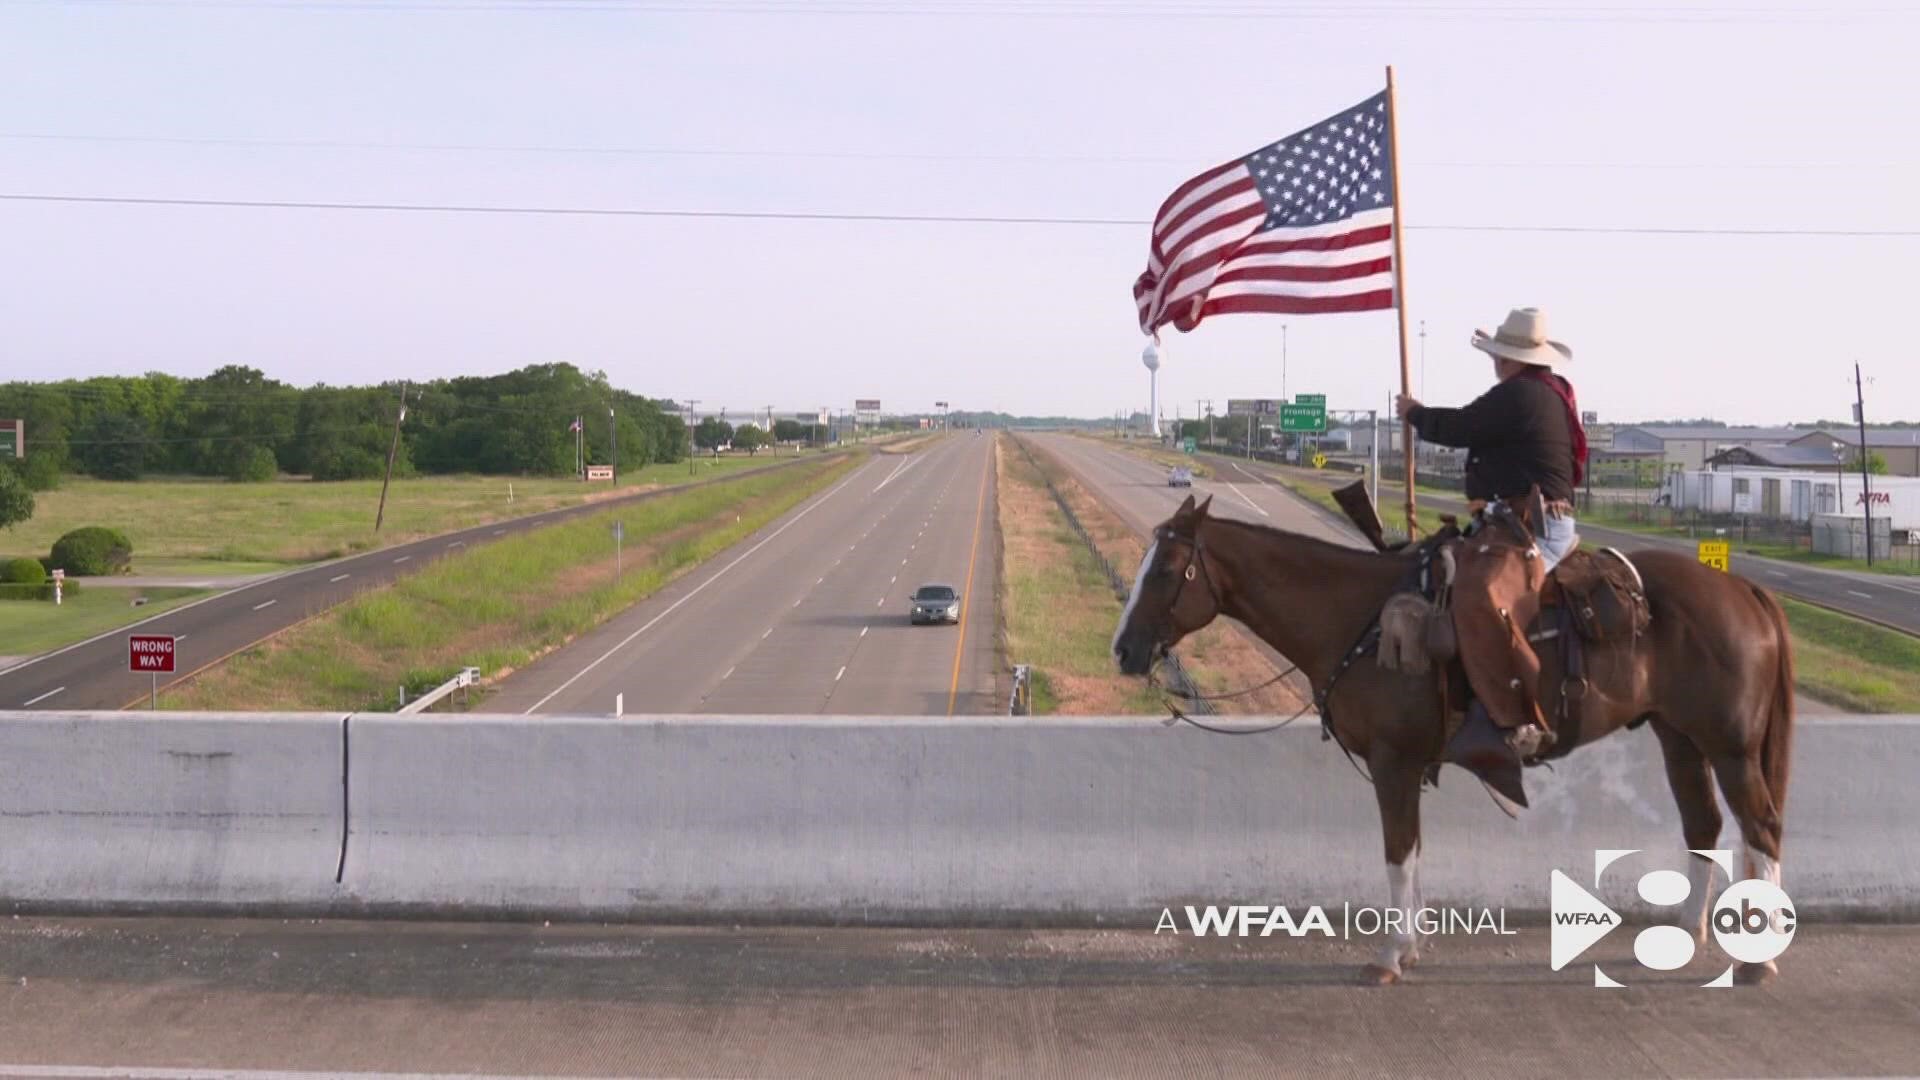 Clint Sparks, a J Bar C Cowboy Church member in Palmer, has sat atop his horse since 2015 near FM813 and I-45 to simply be a beacon of encouragement.